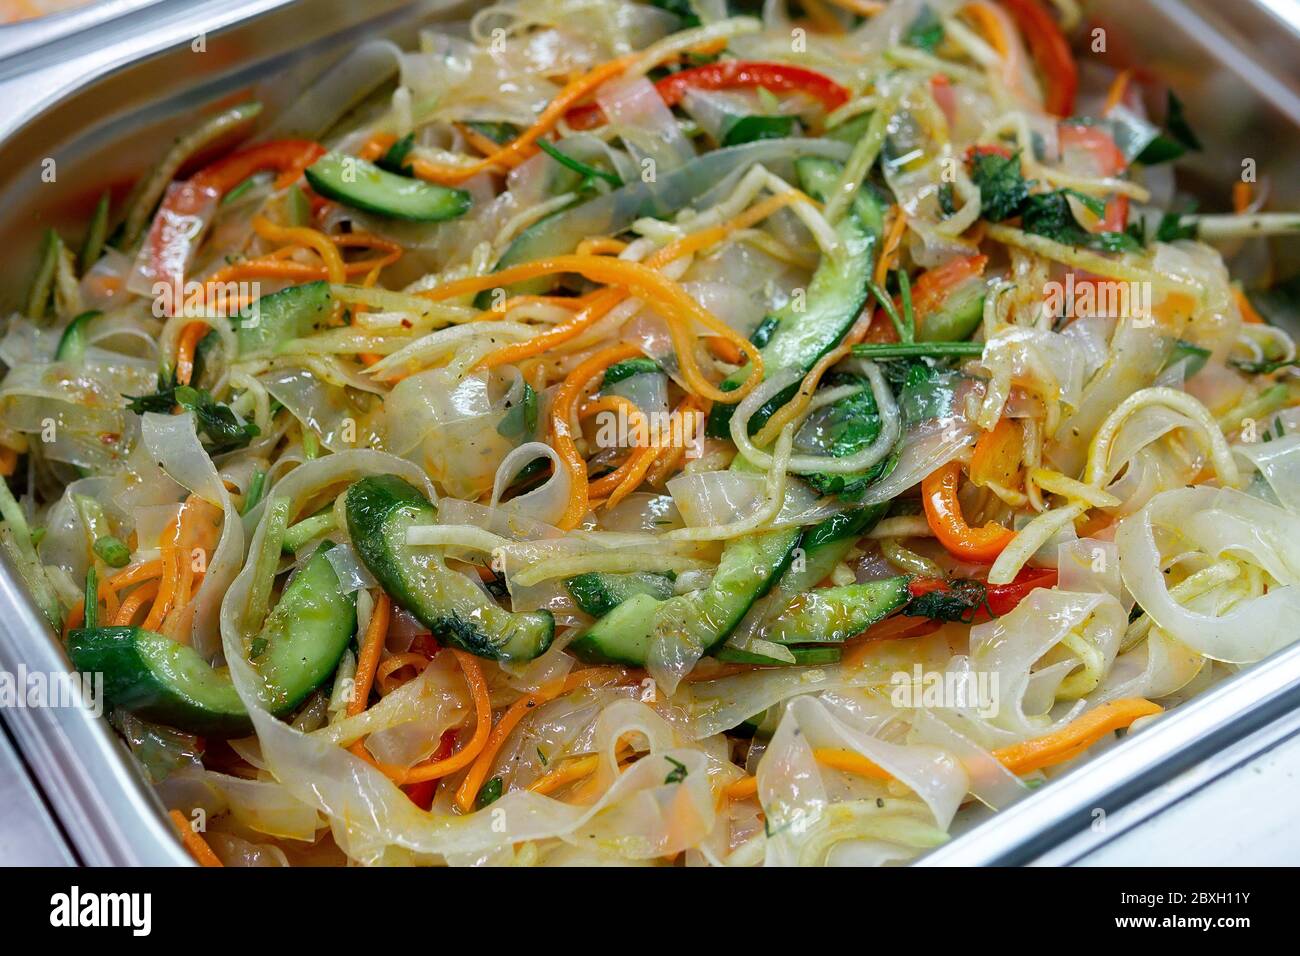 Ashlyamfu,starch noodles, dishes national dish of the Uighur cuisine. sale of a ready-made dish on the market. Stock Photo